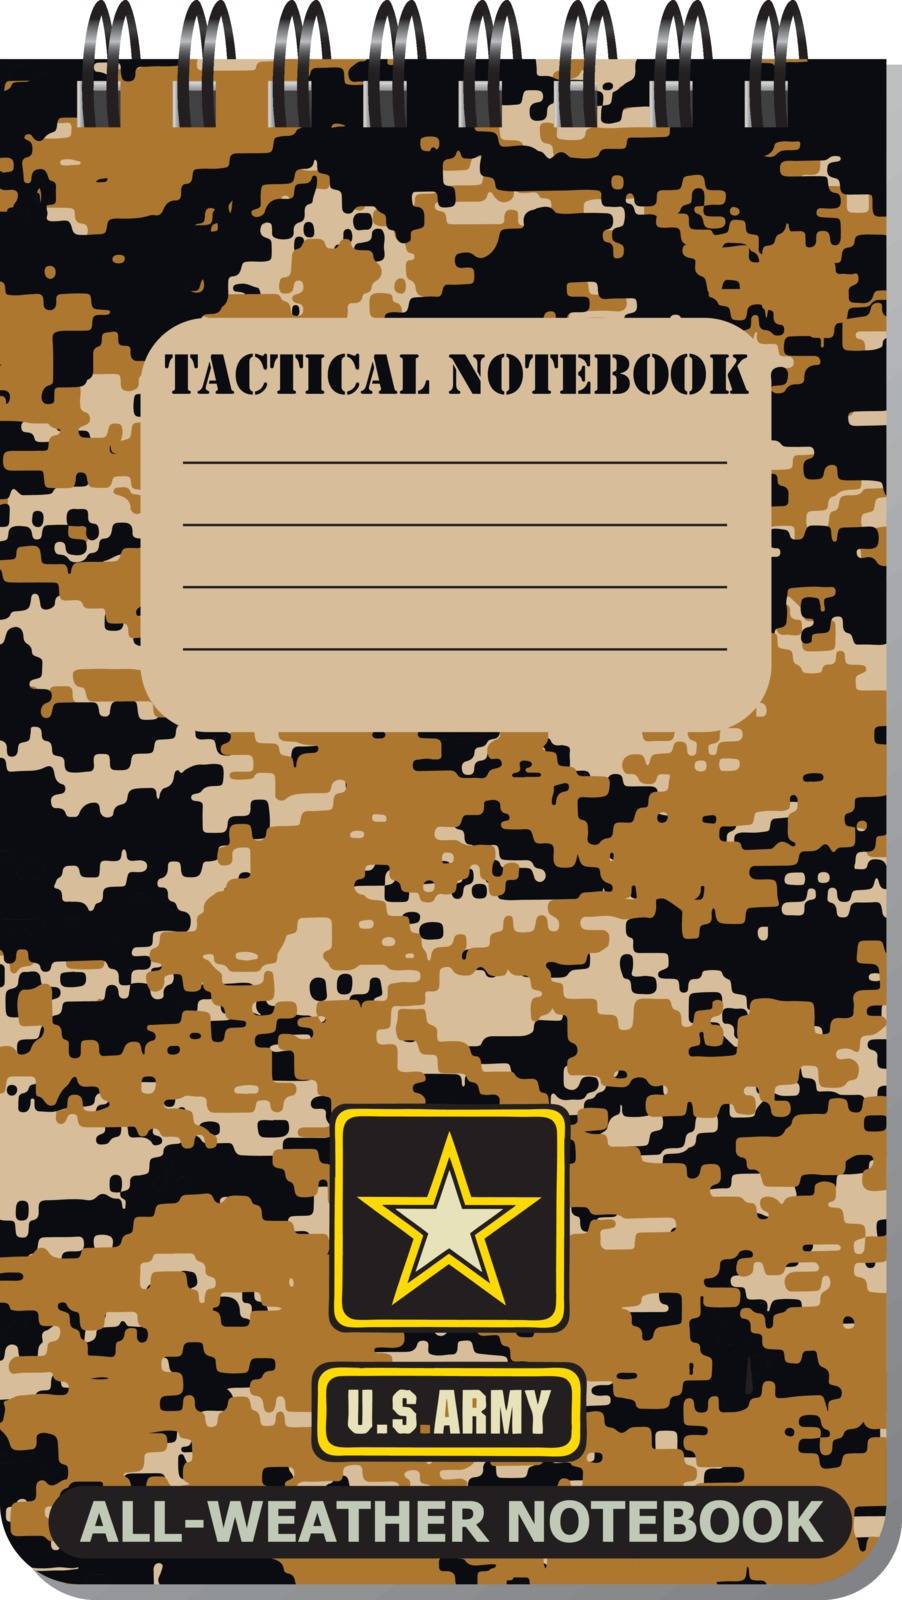 Tactical notebook for the army, used in all weathers.